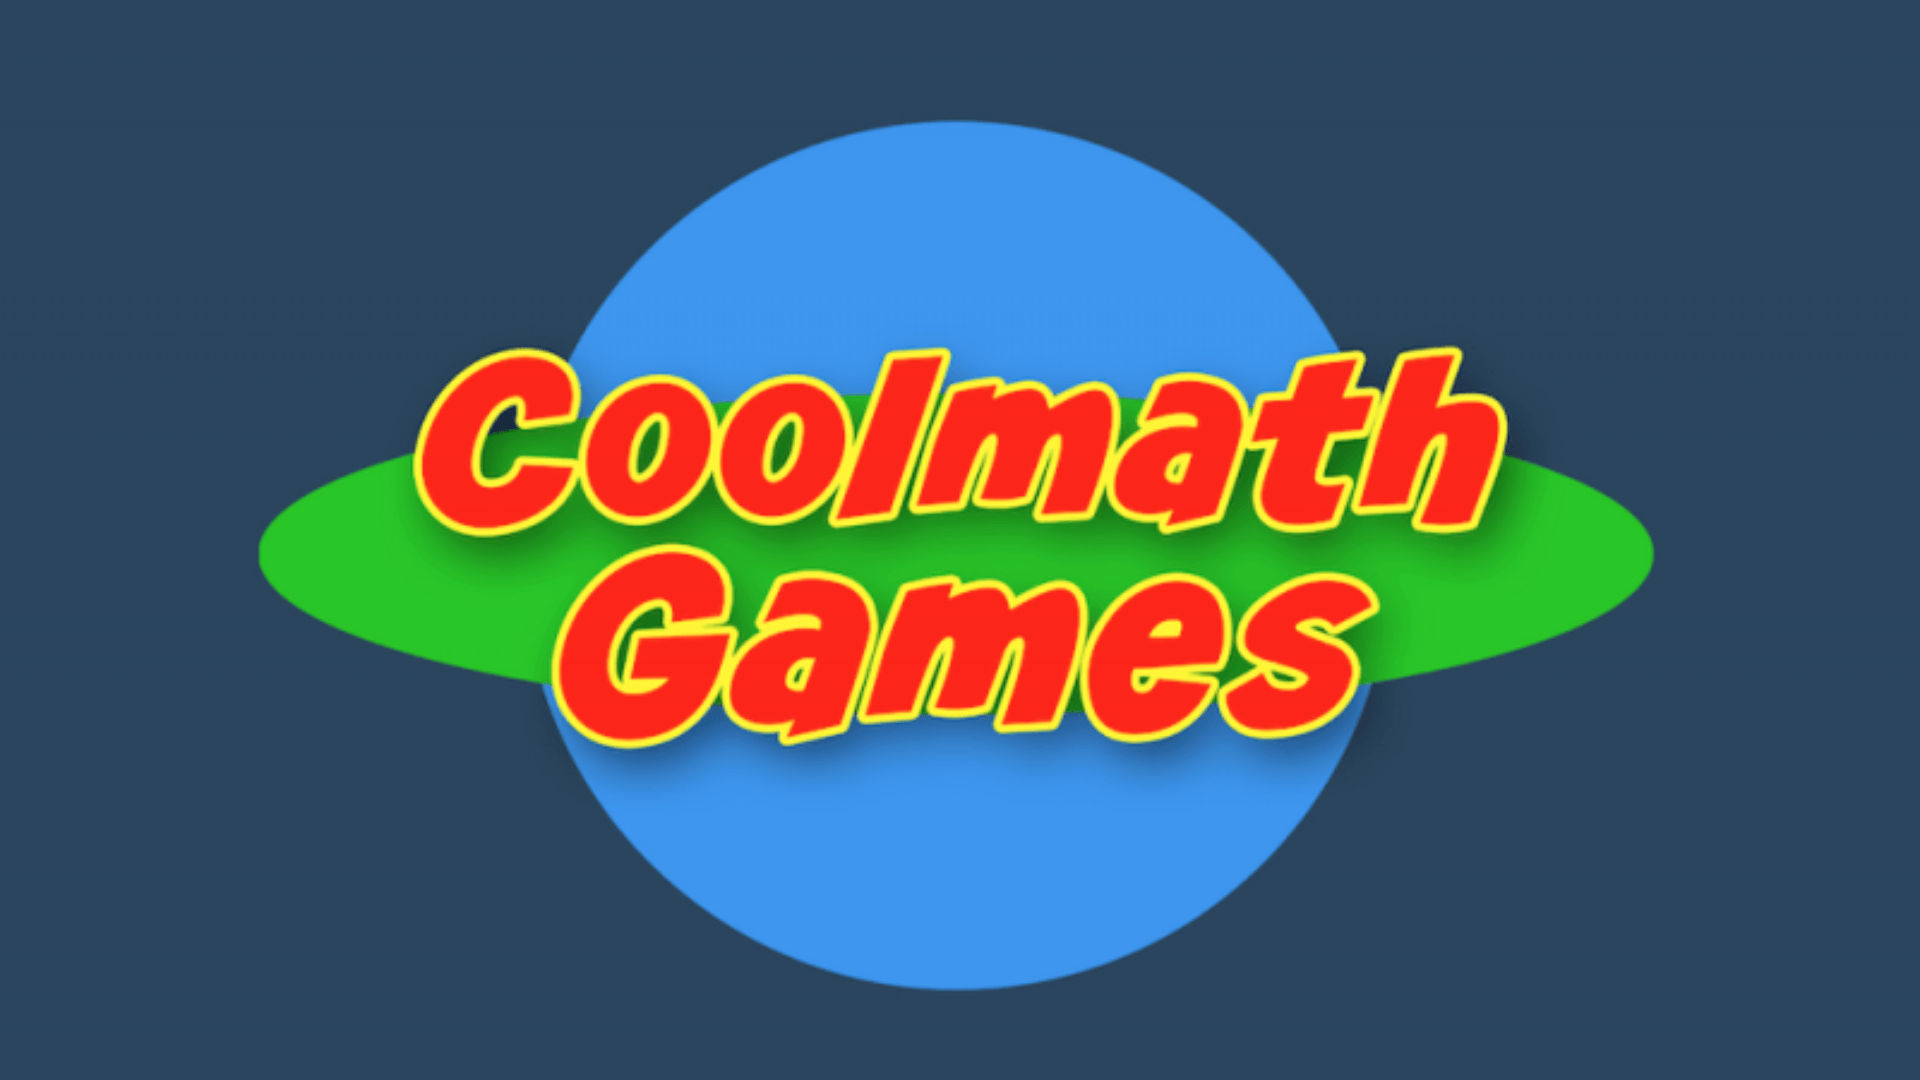 Snake: The Adventure - Play it Online at Coolmath Games